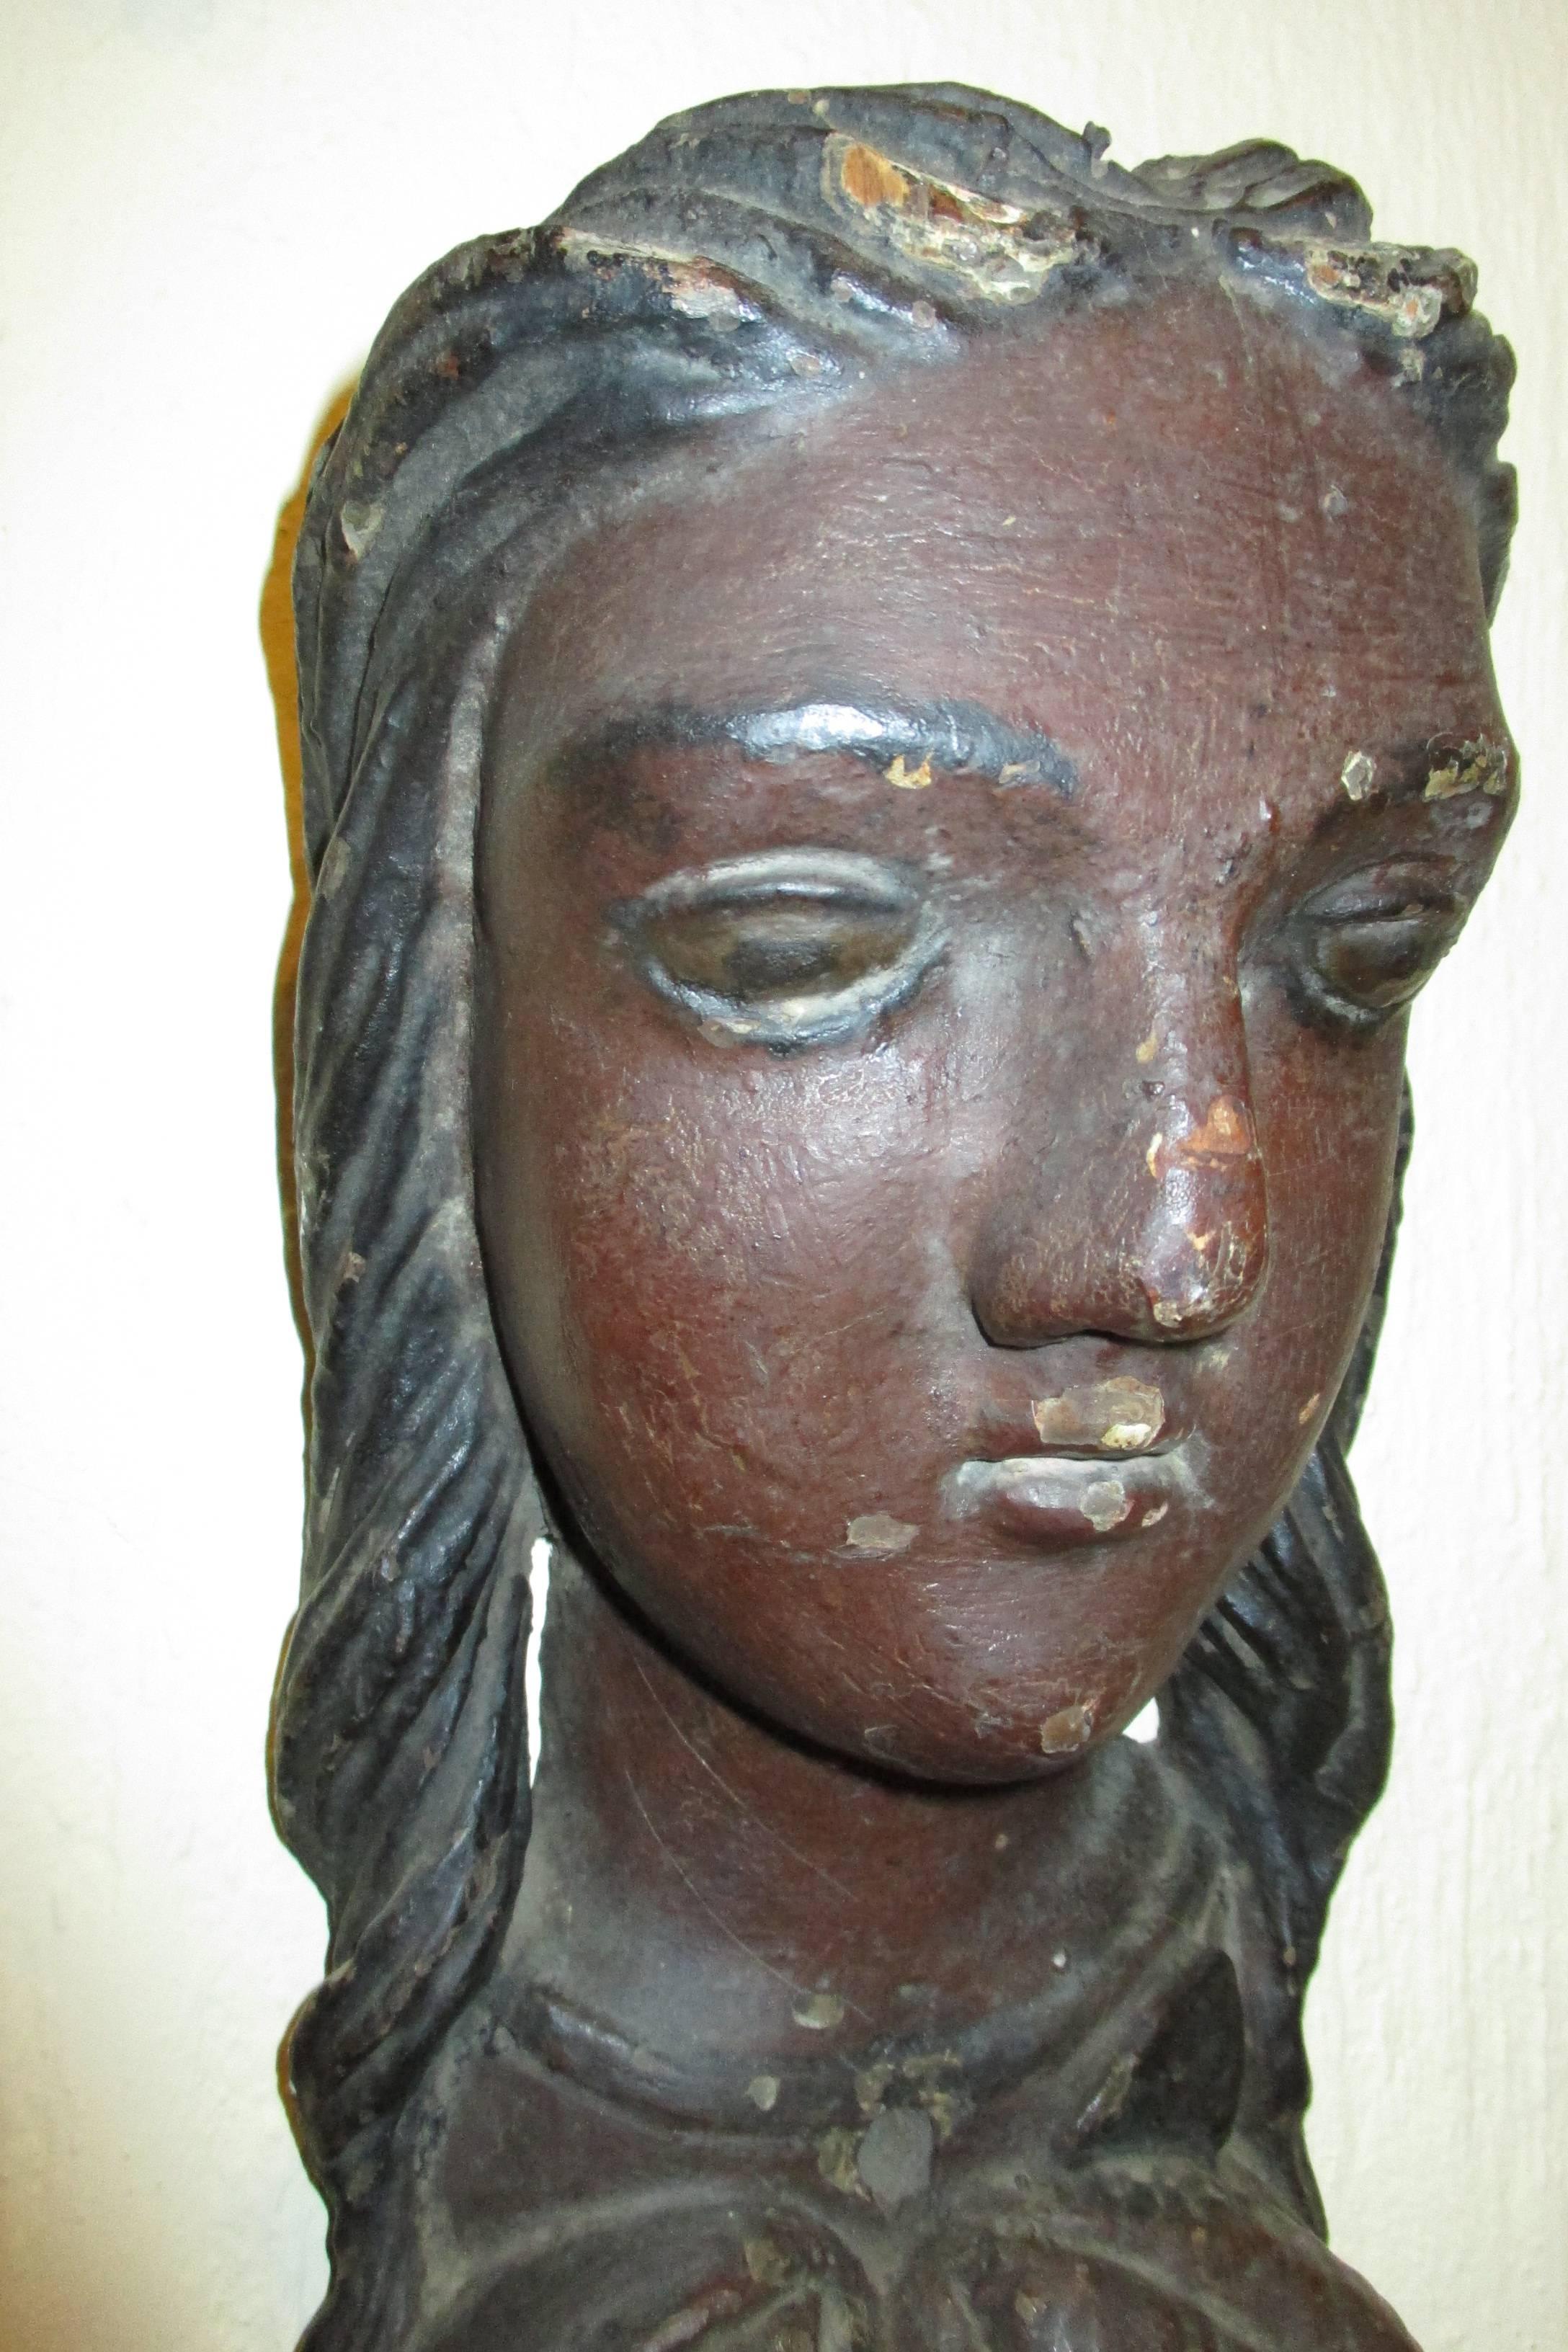 Of unknown origin this carving is reminiscent of the female figureheads found on early ships.  The wood appears to be pine or some other soft wood.   It is  like a Europeans perception of dark skinned peoples from the cocoa growing regions.  An